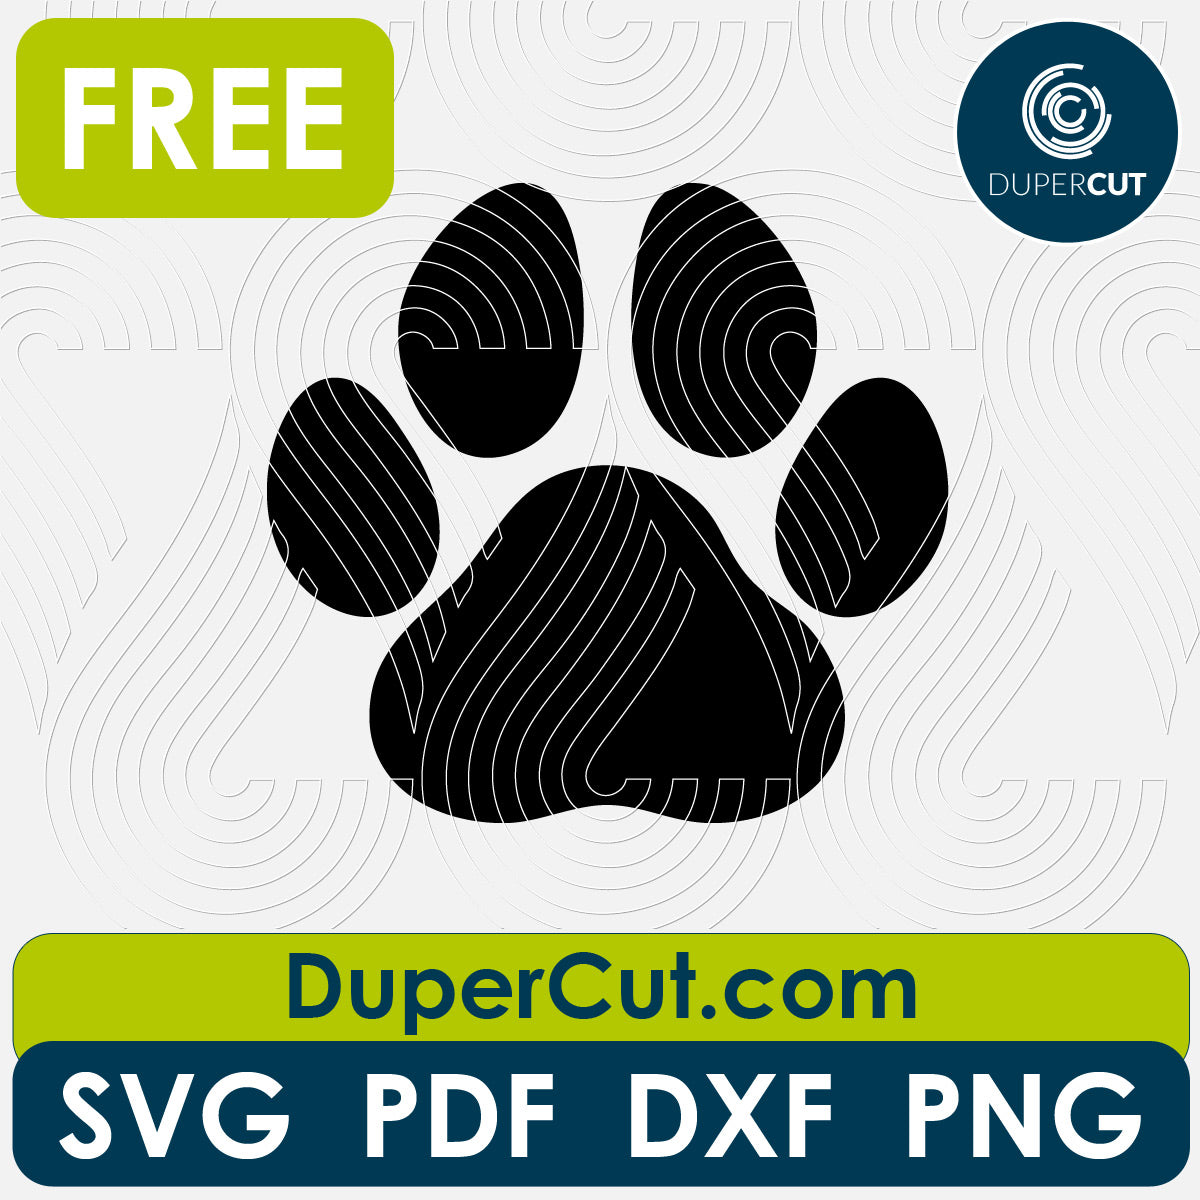 Paw print silhouette - free SVG PNG DXF vector files for laser and blade cutting machines. Glowforge, Cricut, Silhouette cameo templates by DuperCut.com